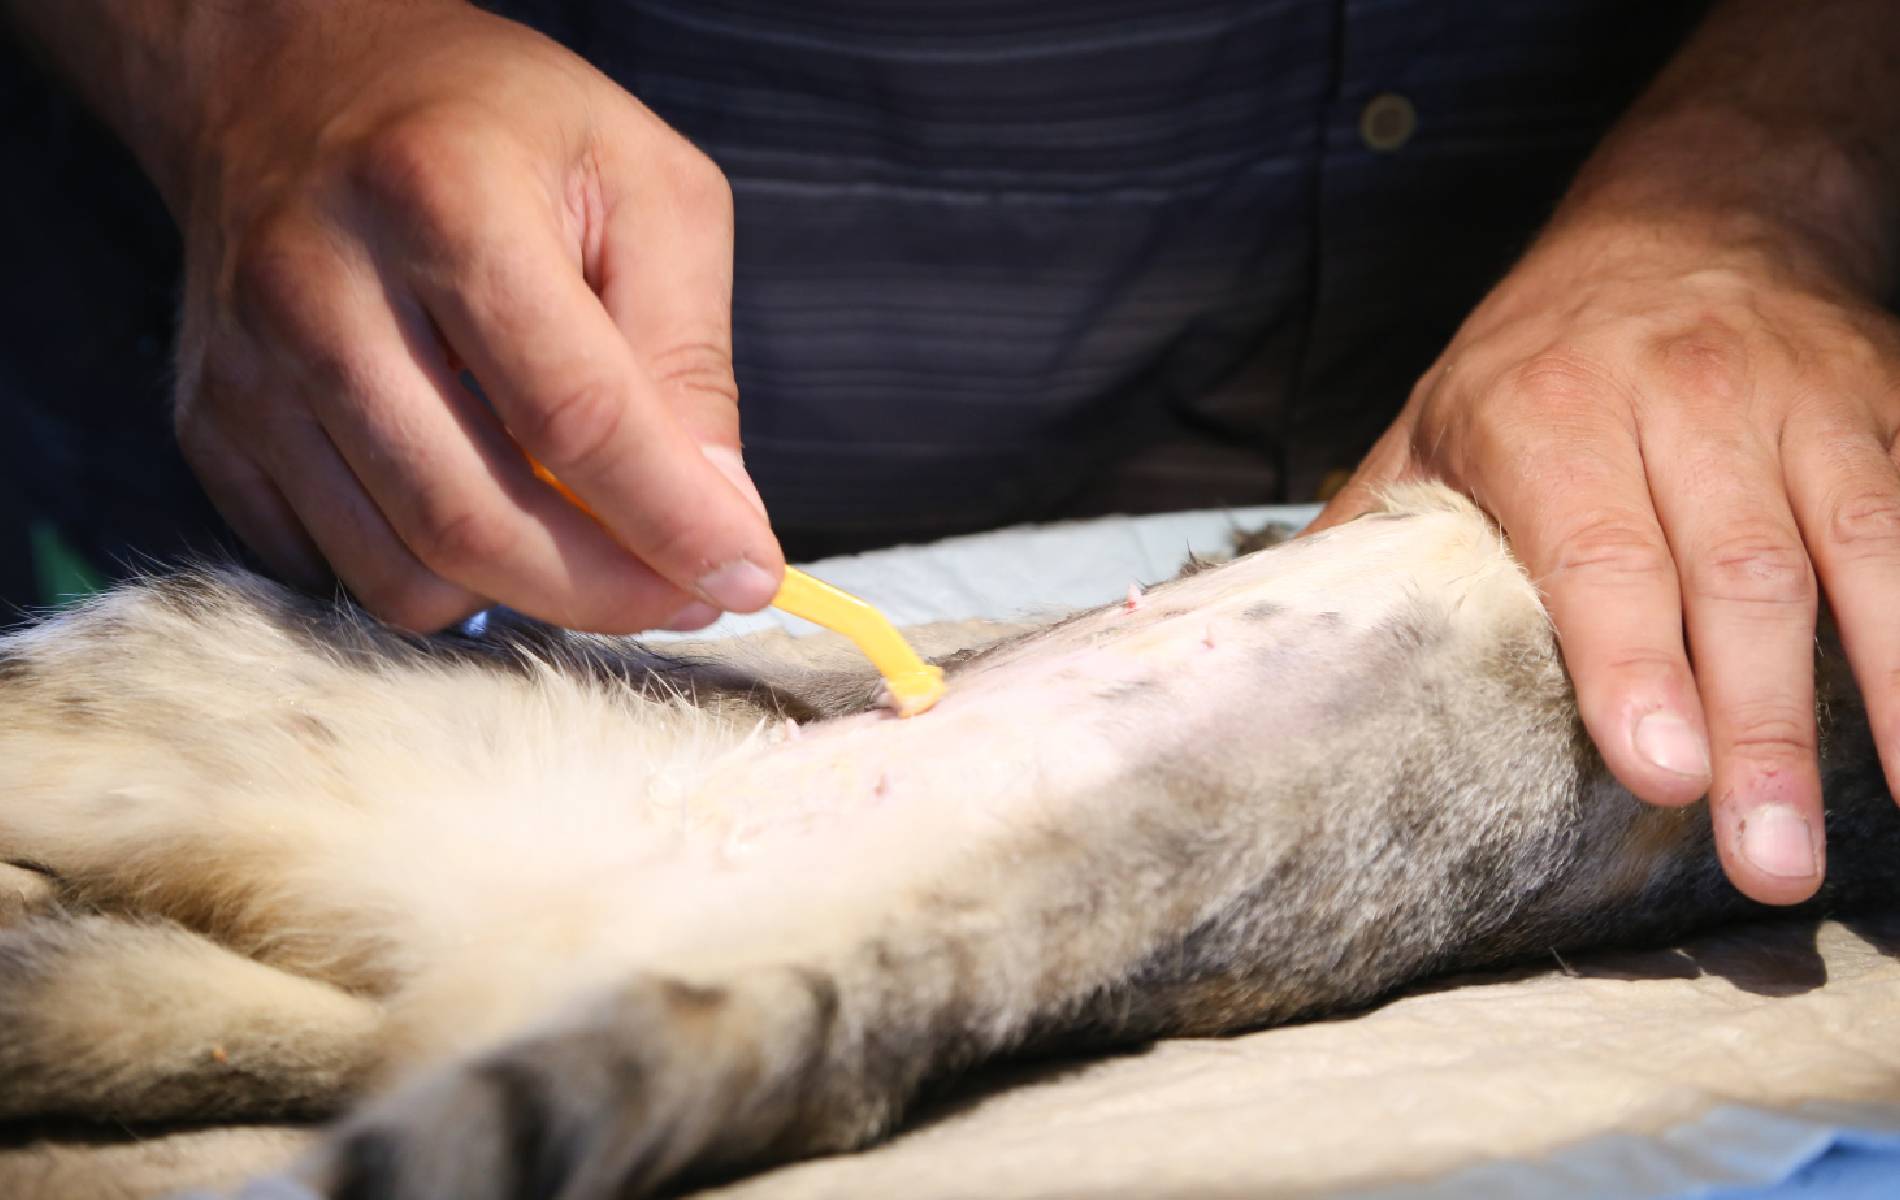 a person cleaning a cat leg<br />
